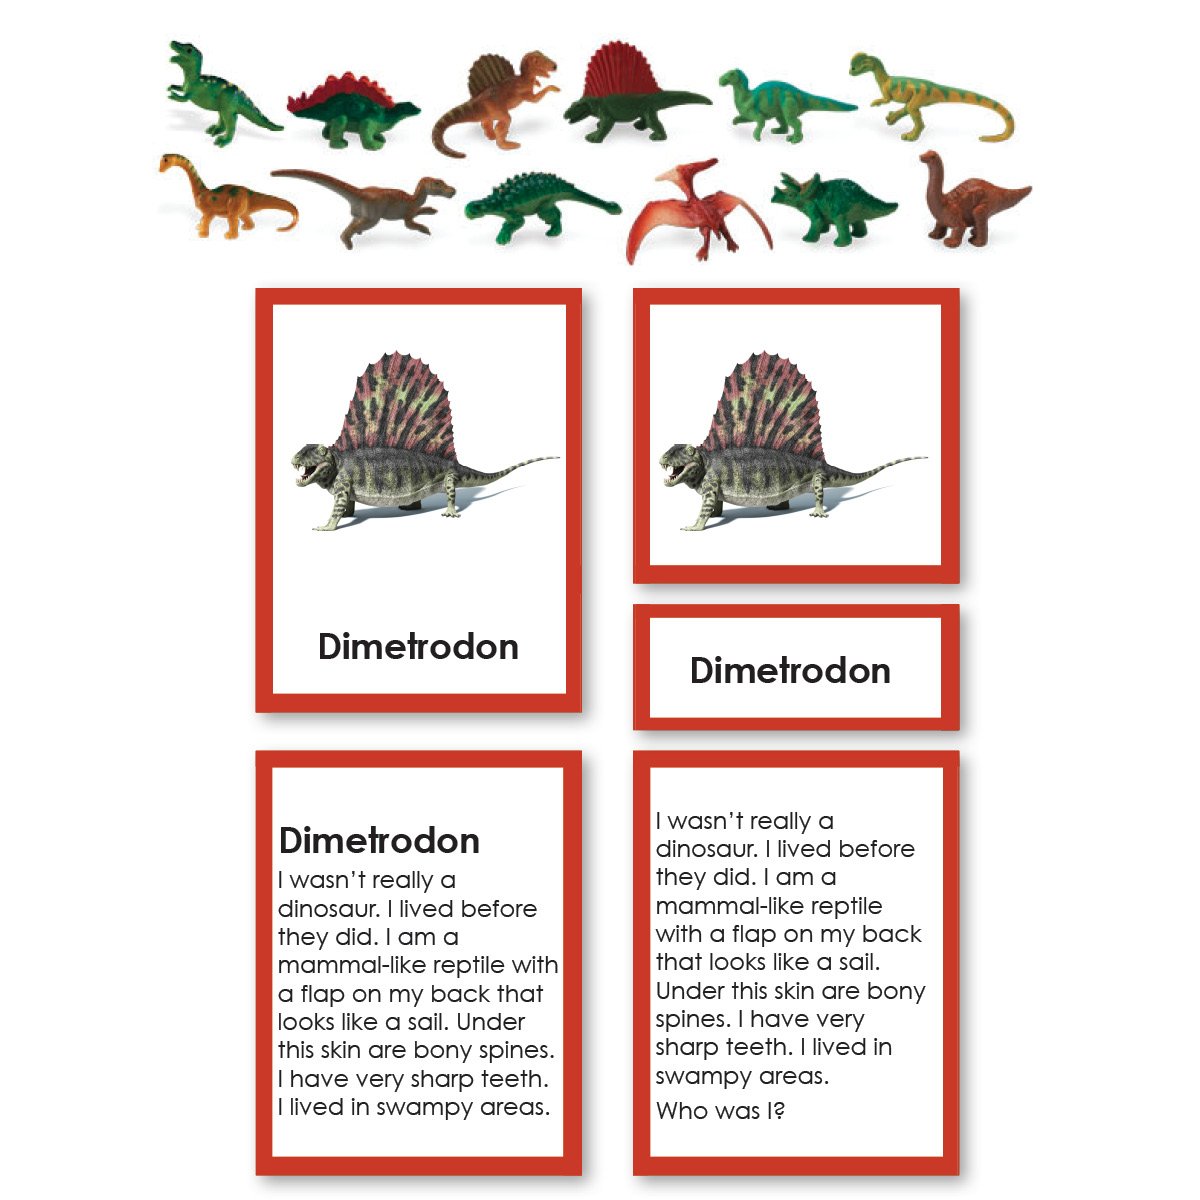 History Material-Prehistory - Dinosaur "Who Am I?" 3-Part Cards With Objects